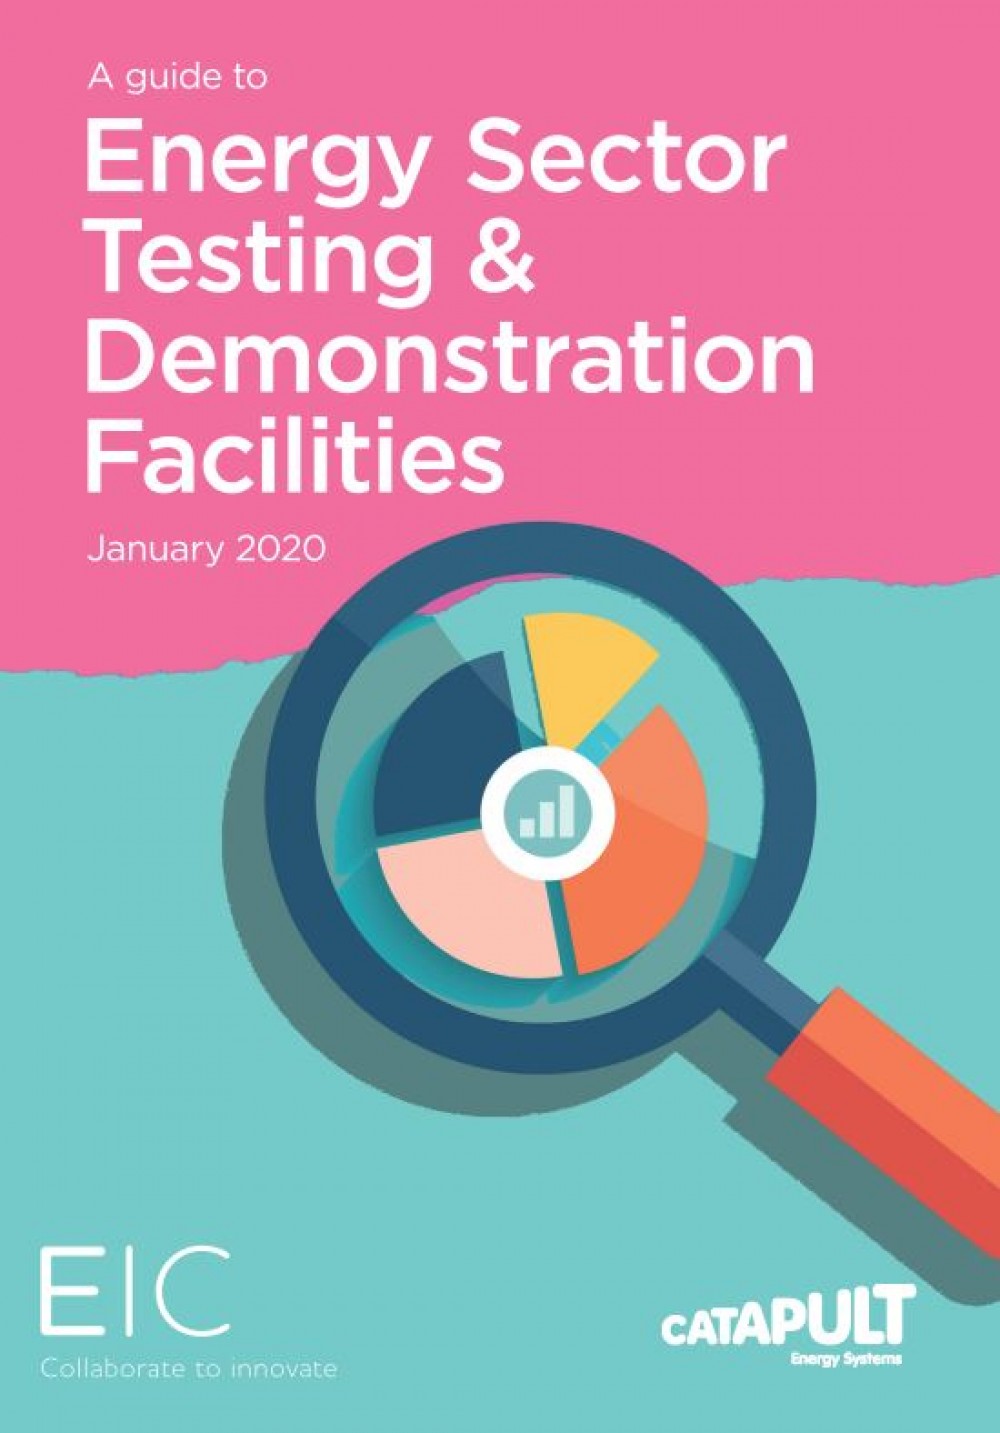 Innovator toolkit: January 2020 guide to energy sector testing and demonstration facilities